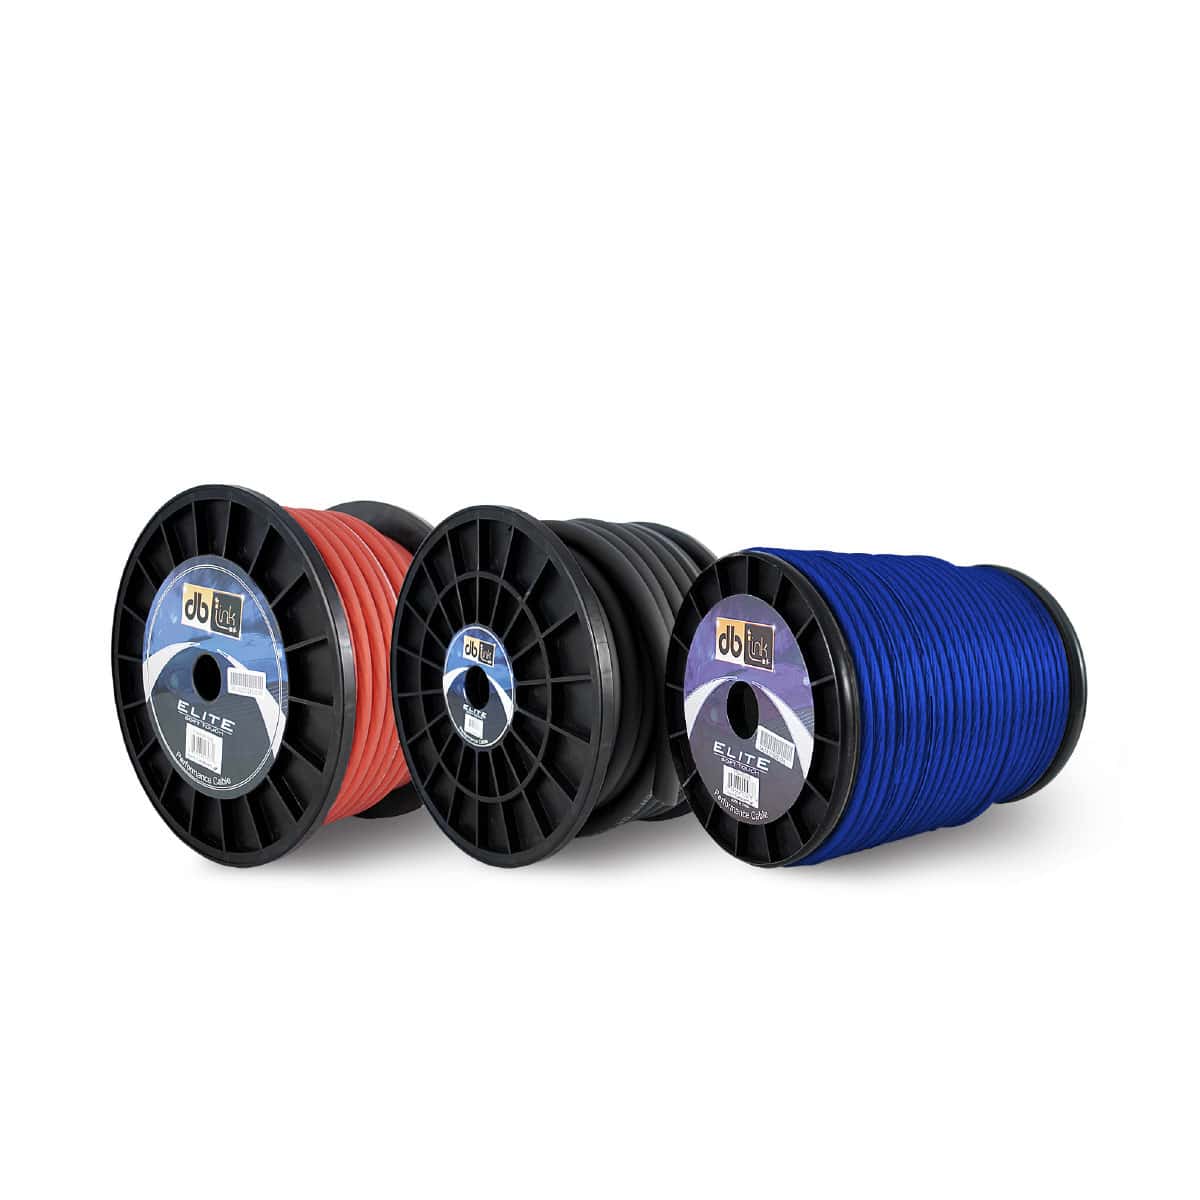 DB Link 4 Gauge Blue Power Wire 100' (30.48 m) Oxygen Free Power/Ground Cable